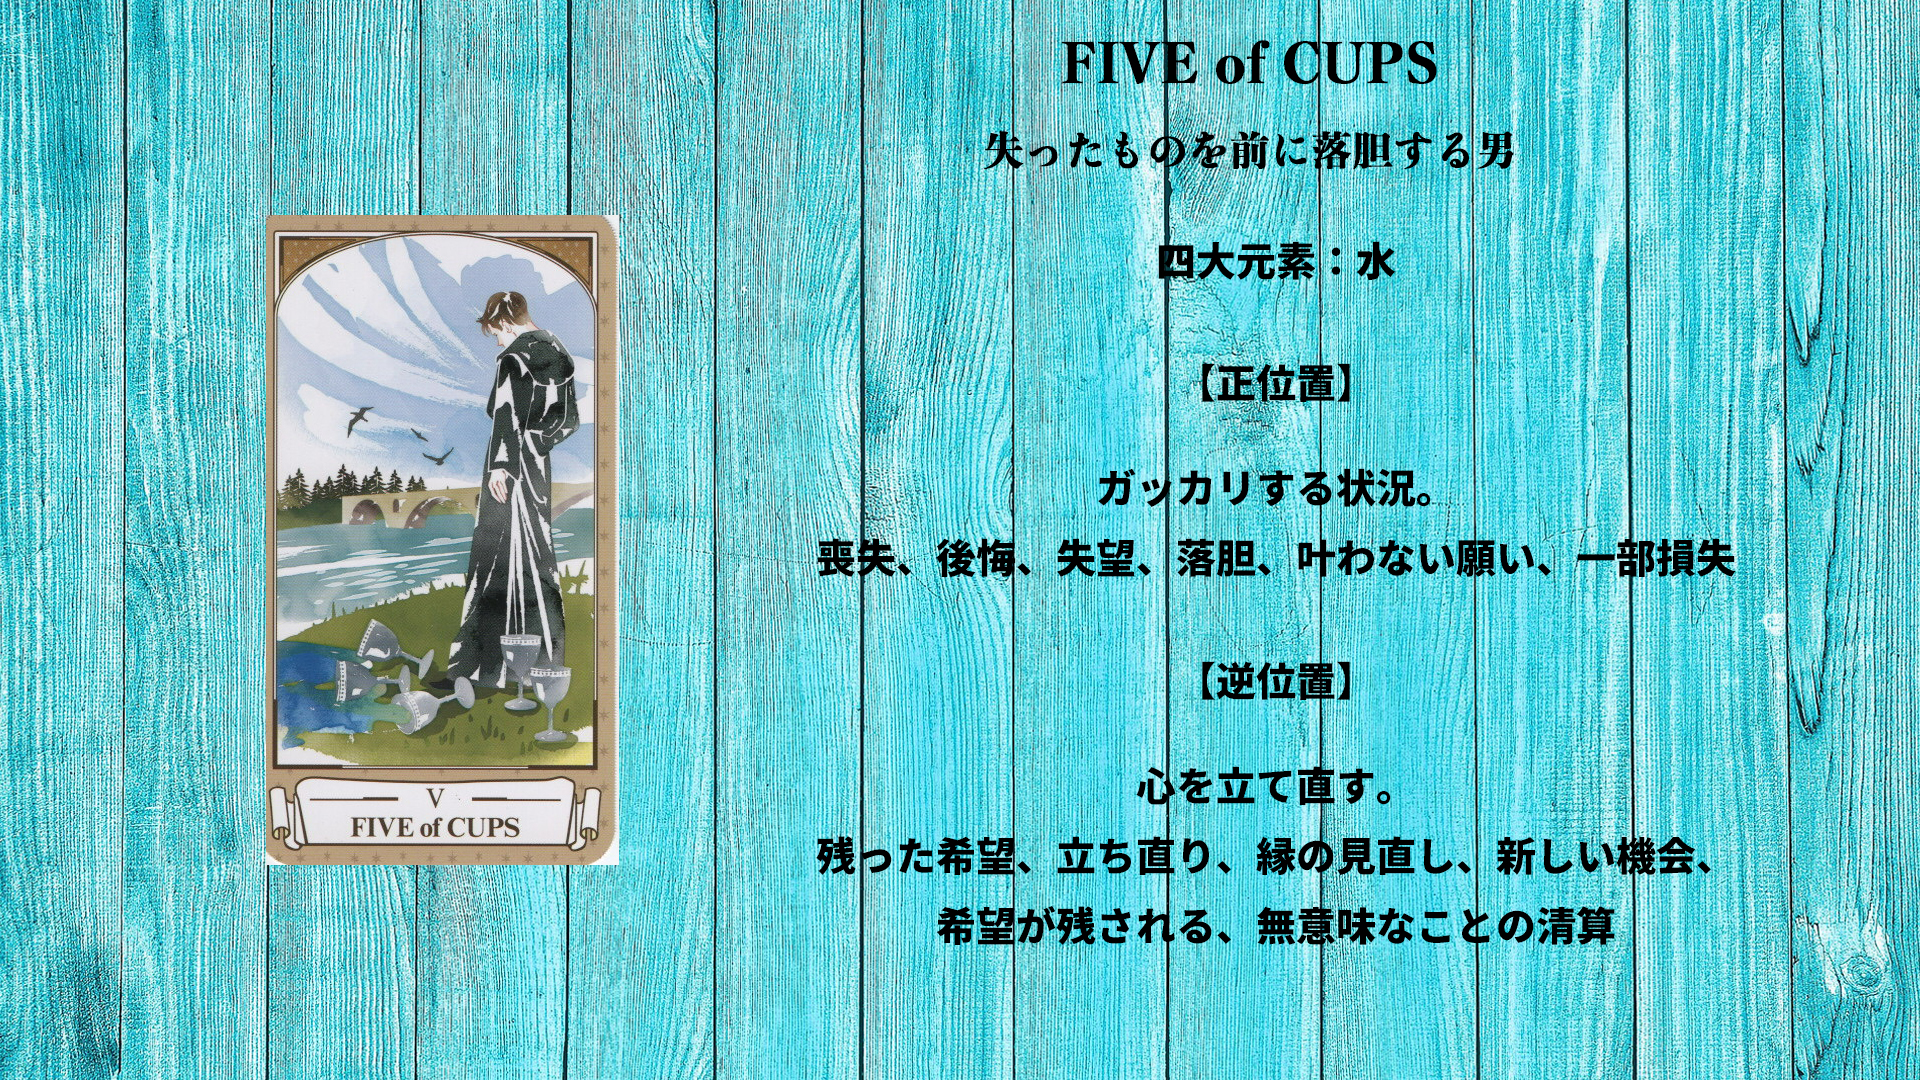 FIVE of CUPS